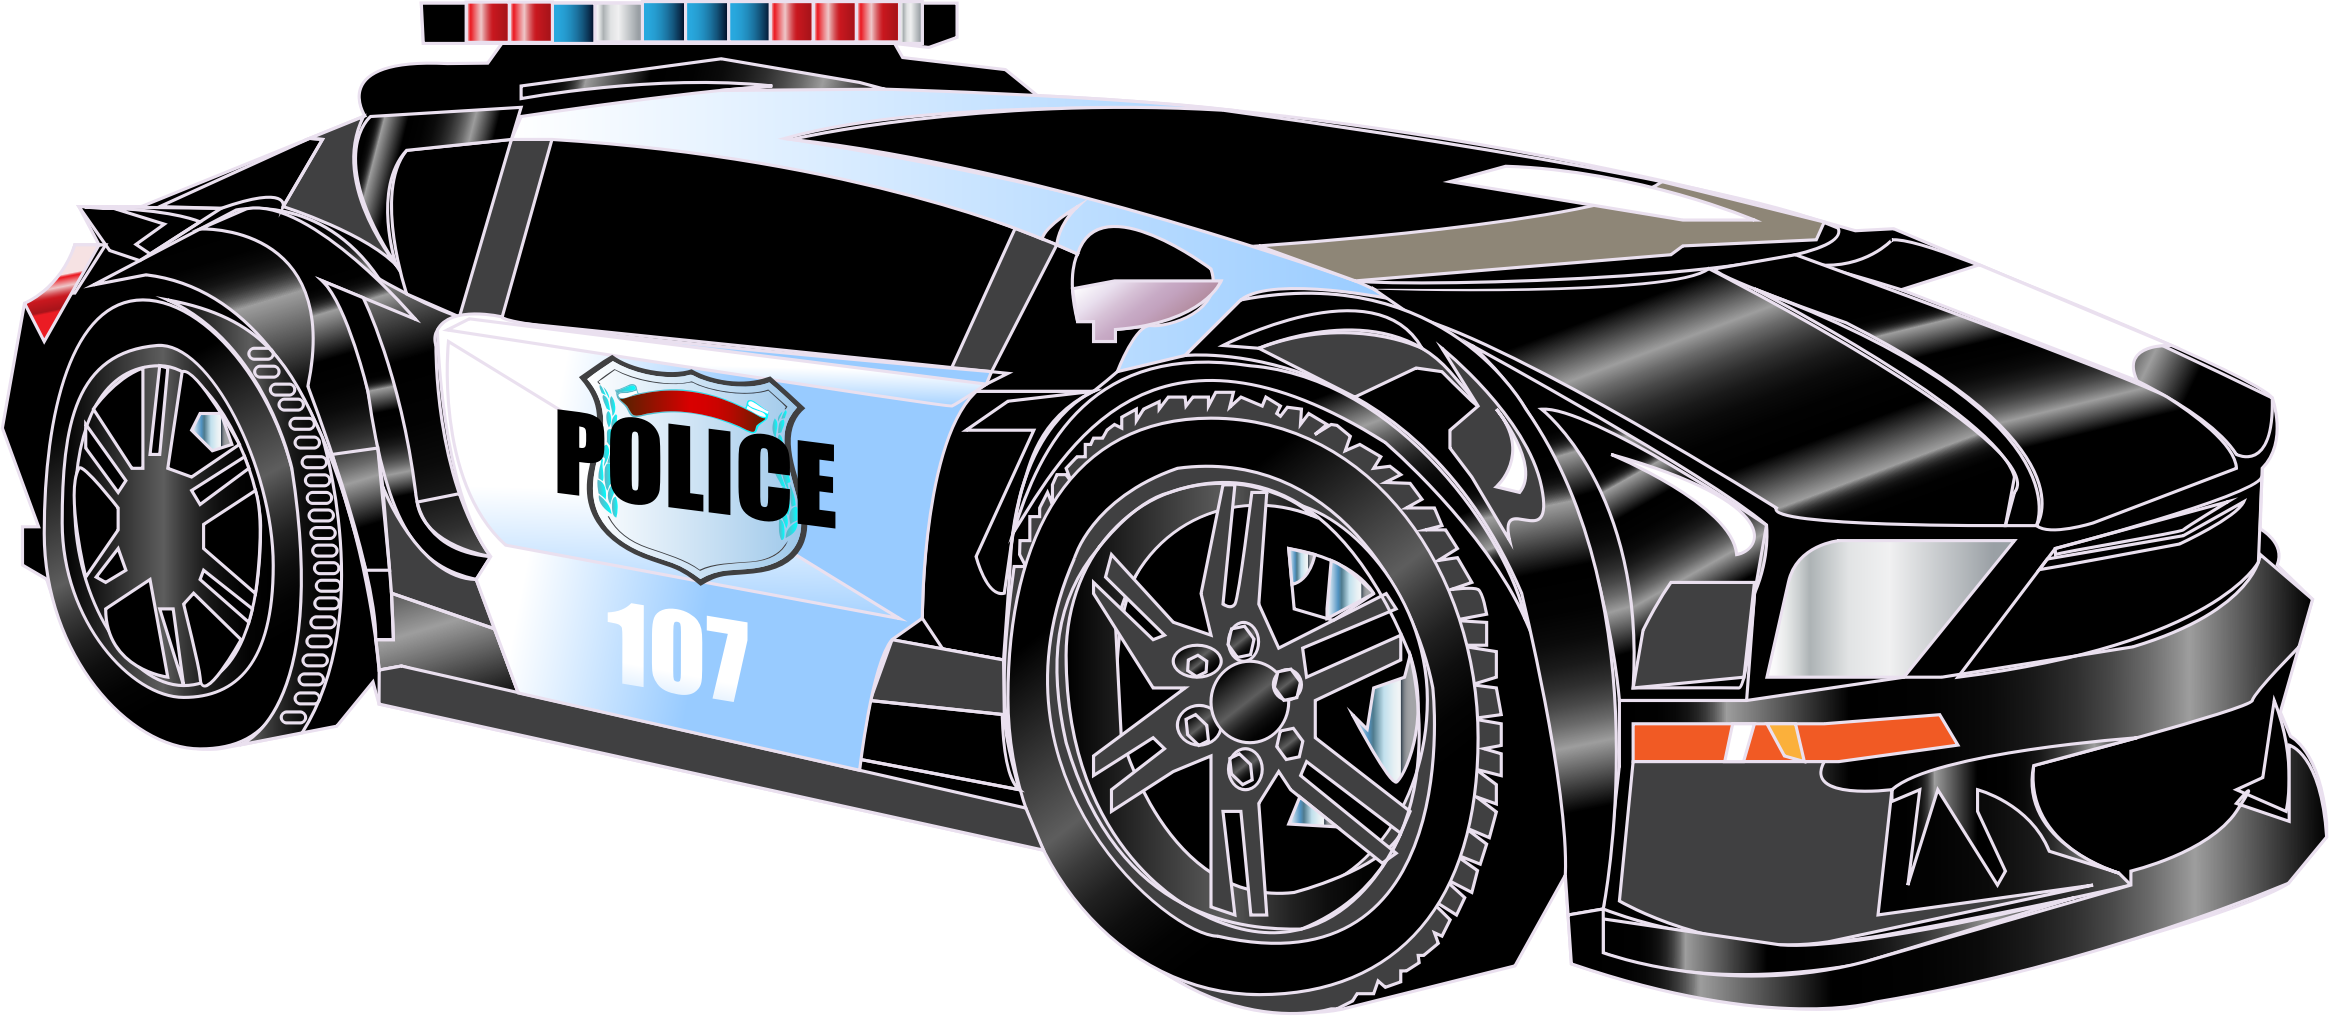 Clipart Police Car 2 - Police Car, Transparent background PNG HD thumbnail